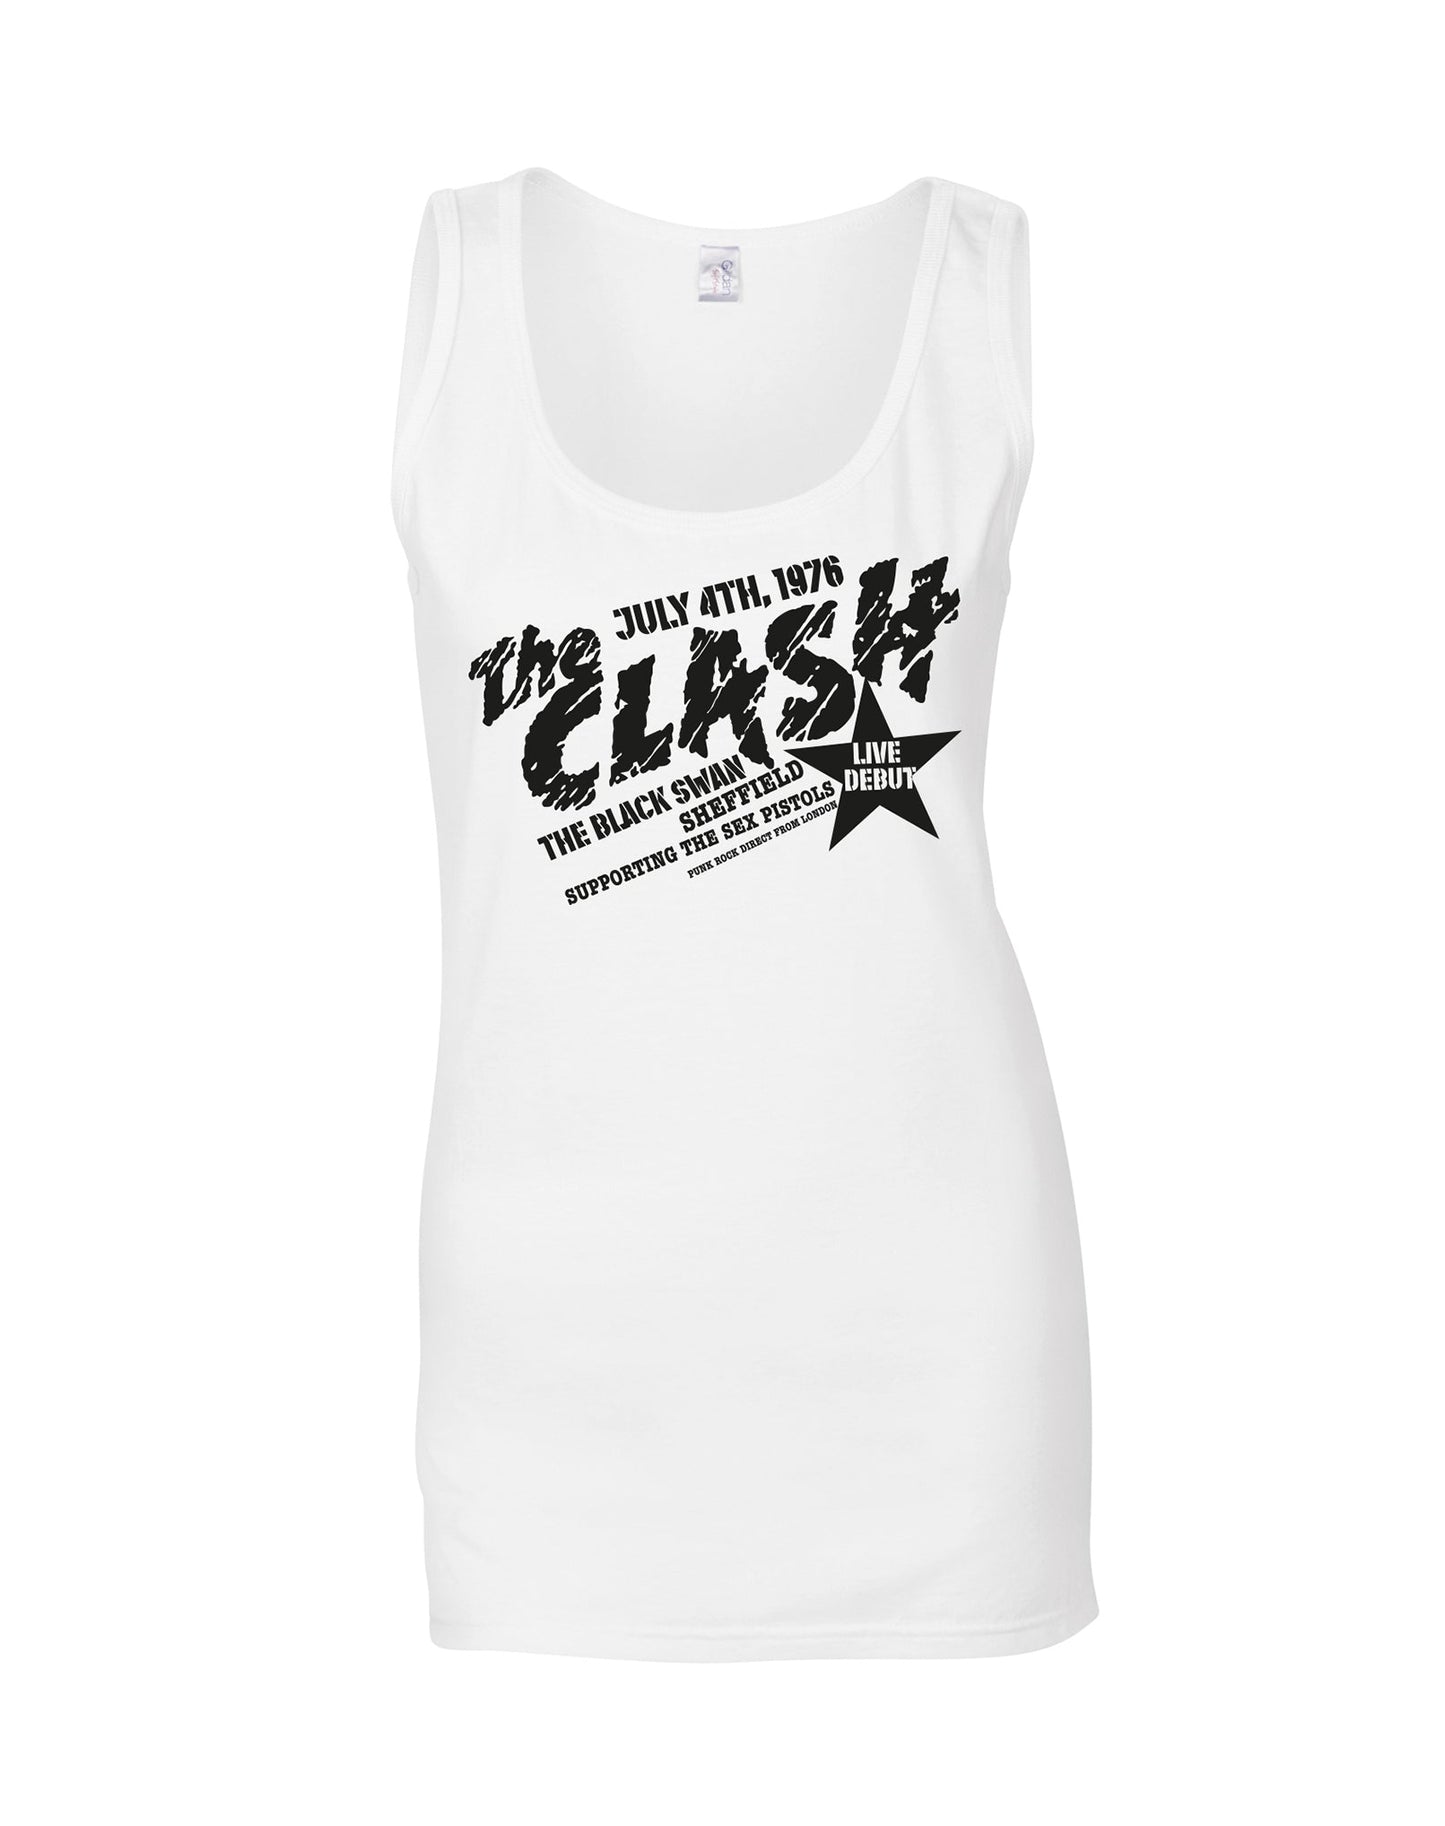 The Clash at the Black Swan ladies fit vest - various colours. - Dirty Stop Outs